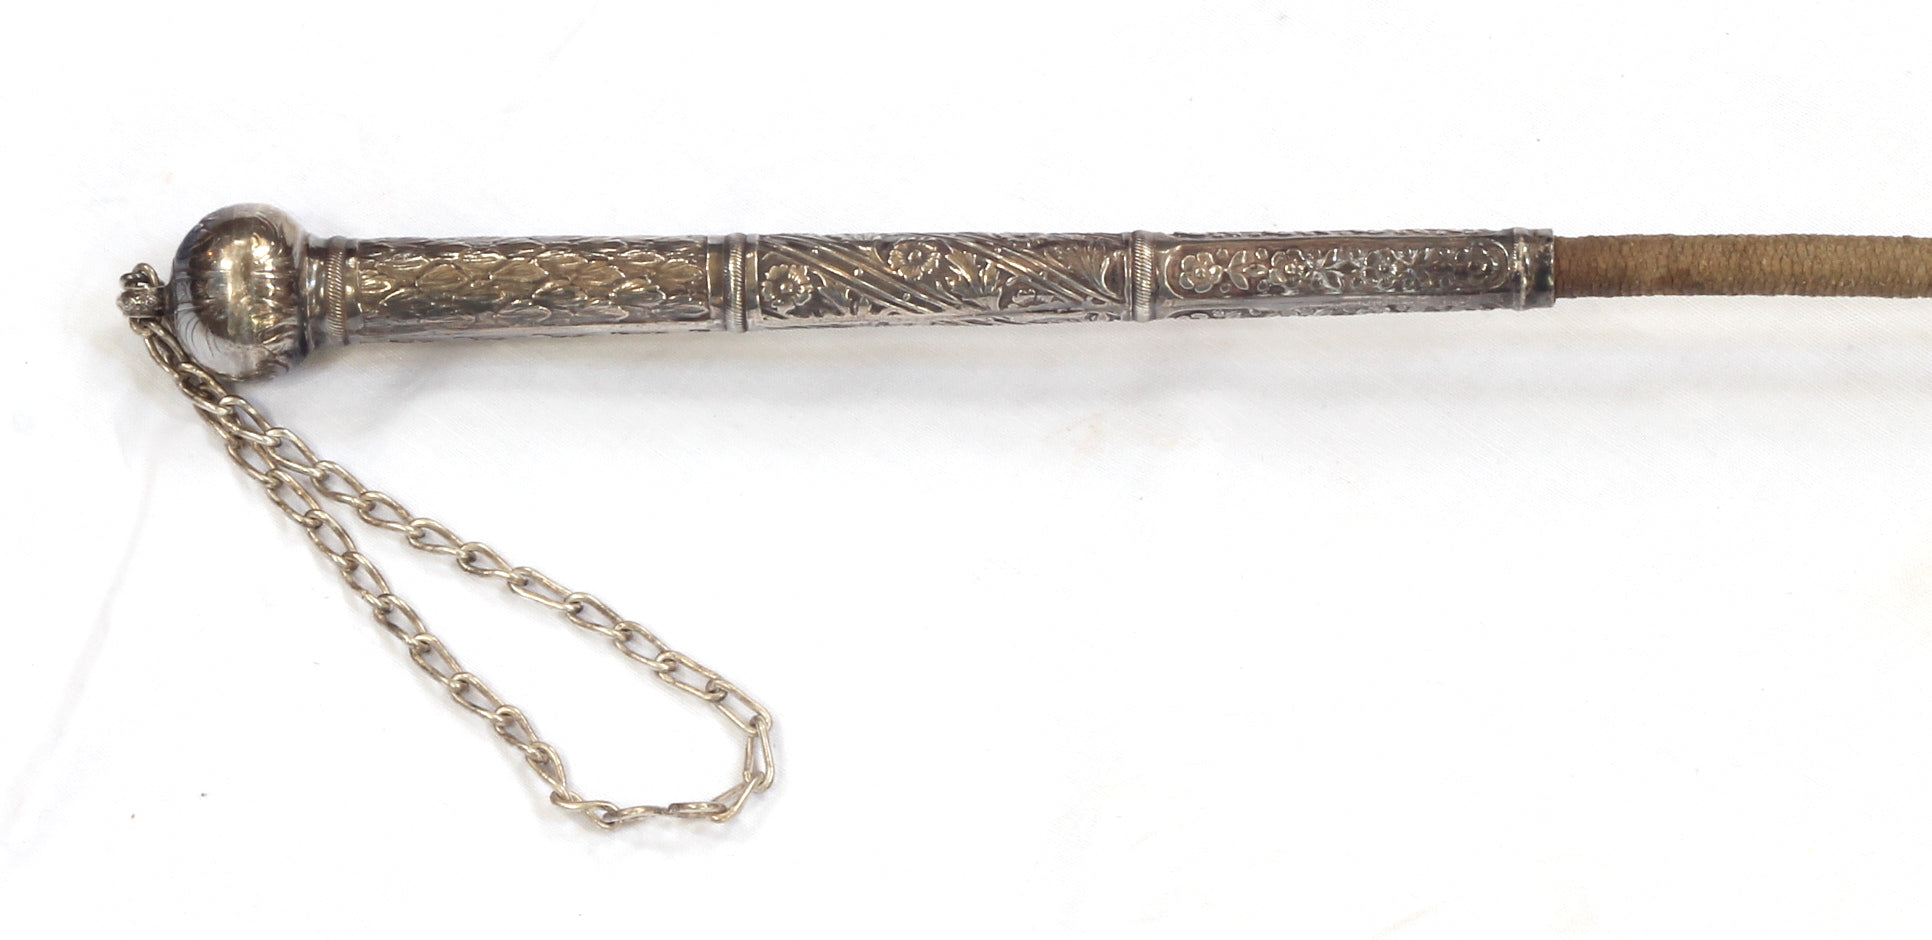 Silver Handled Russian or Caucasian Riding Whip or Nagaika